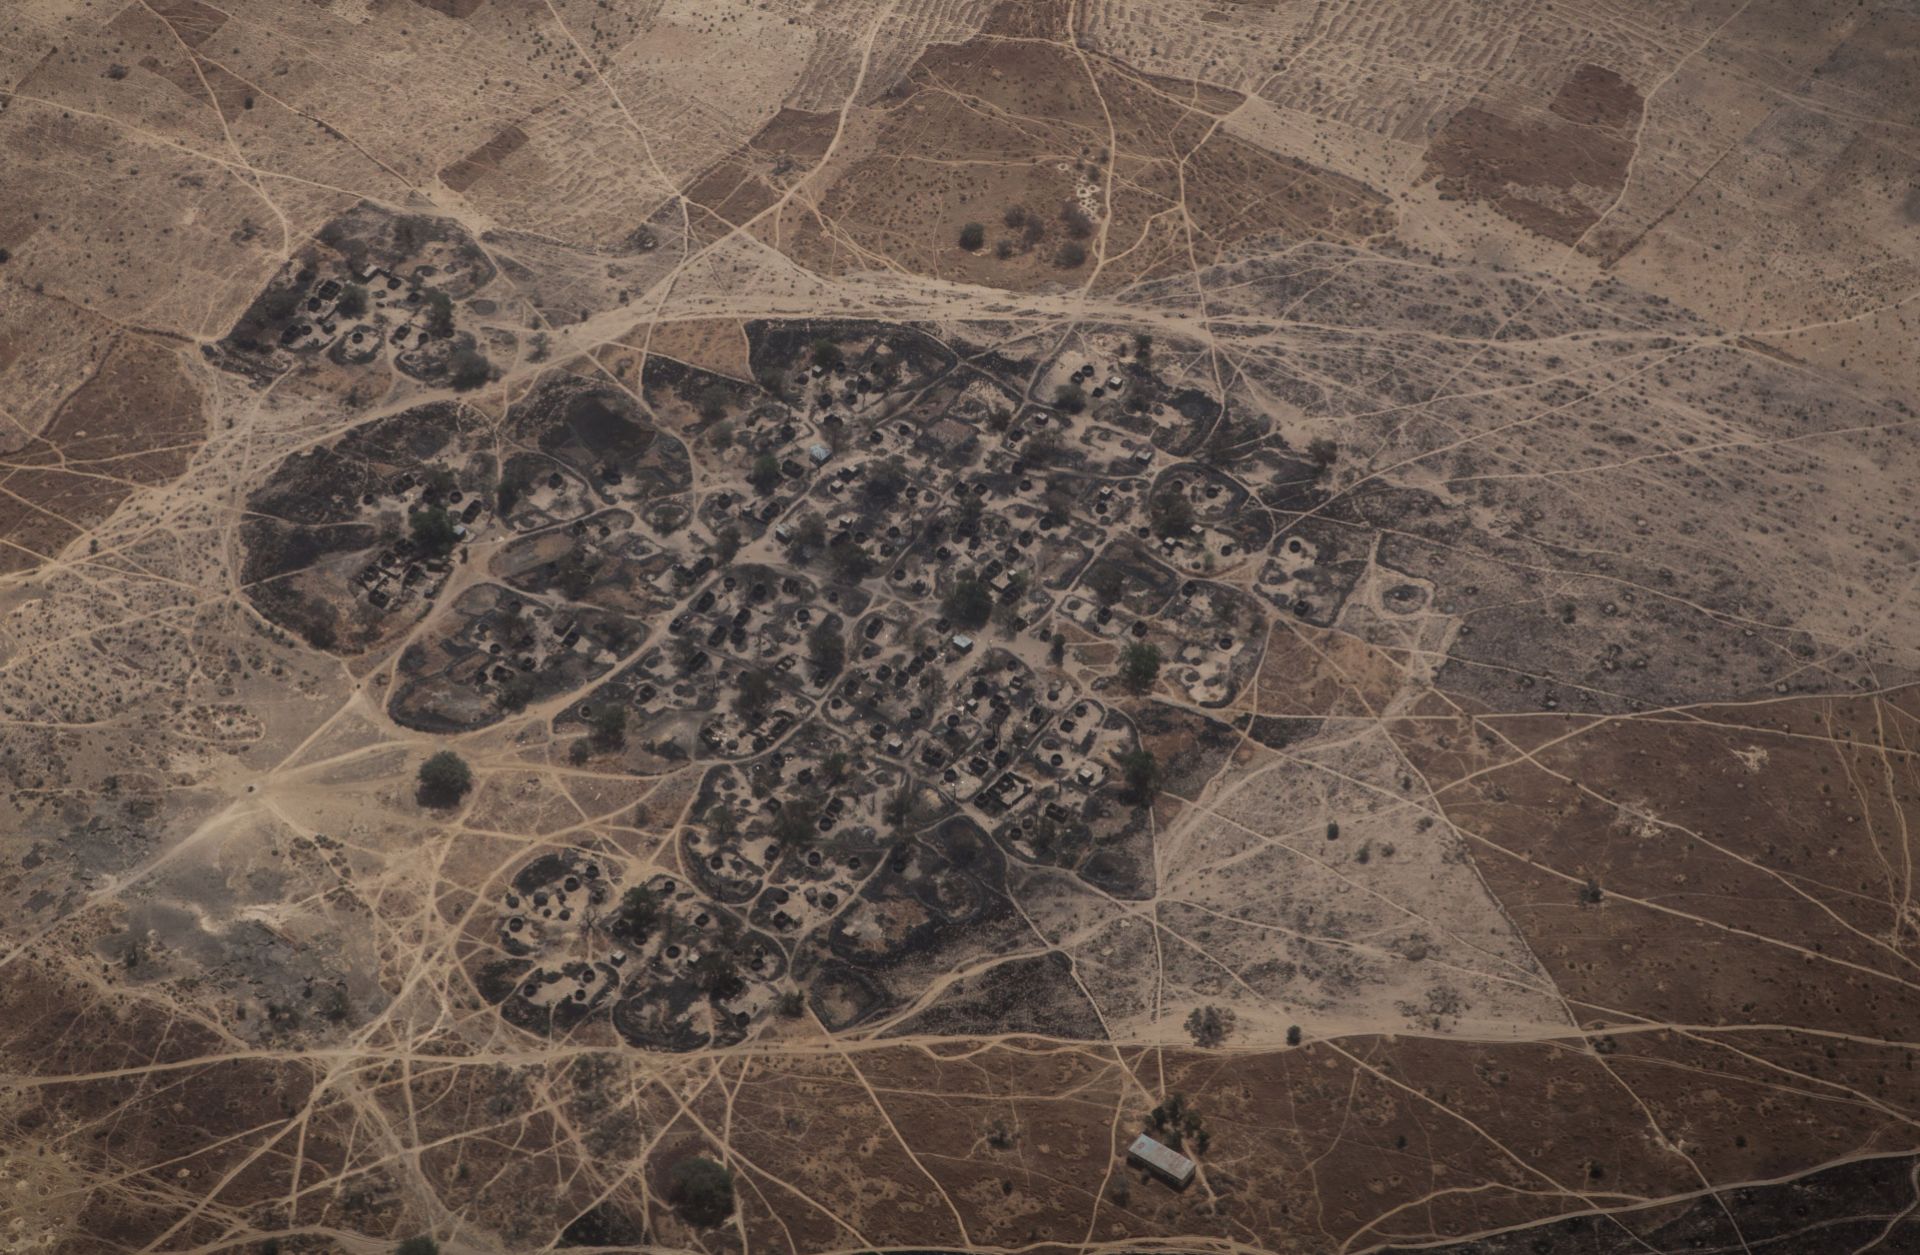 An aerial photograph from February 2017 shows a burnt village, believed to have been attacked by Boko Haram, in northeast Nigeria.